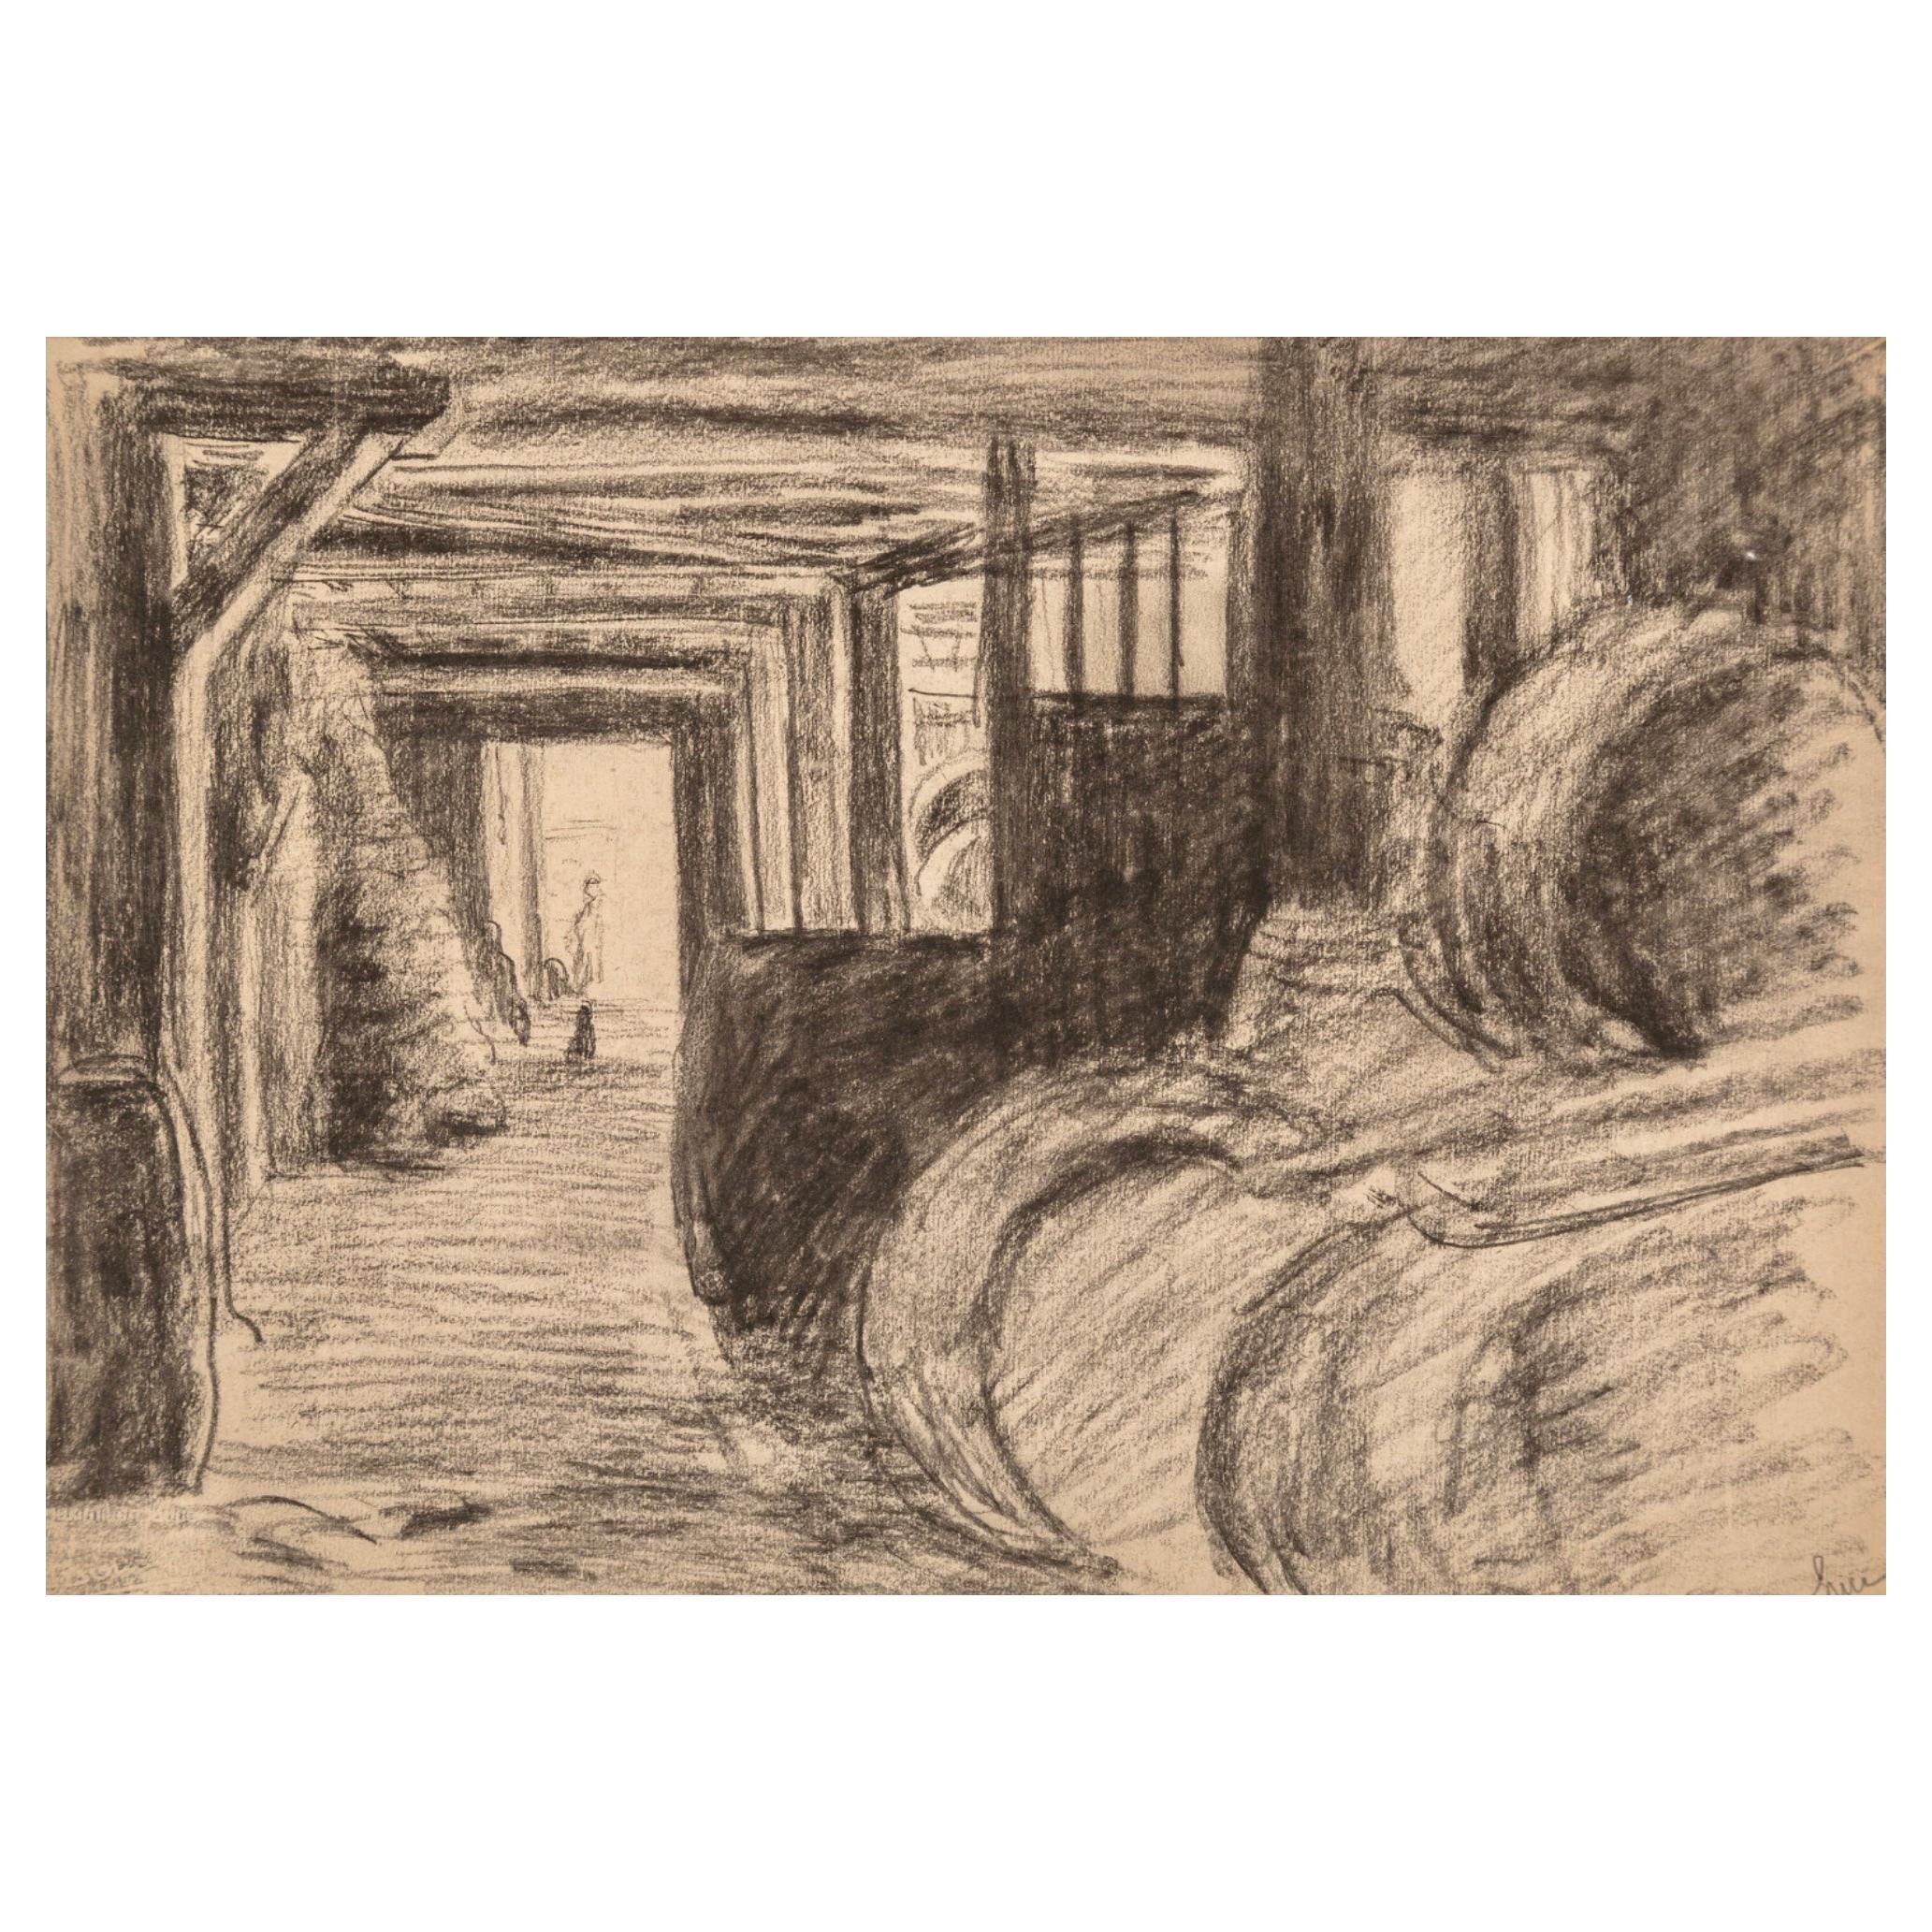 Maximilien Luce (French, 1858-1941) Pencil and charcoal drawing of a shop with goods along the coast line of northern France. A cat can be seen looking at a man far off at the entrance.

Titled: “Un magasin dans le marais”
Charcoal with graphite on